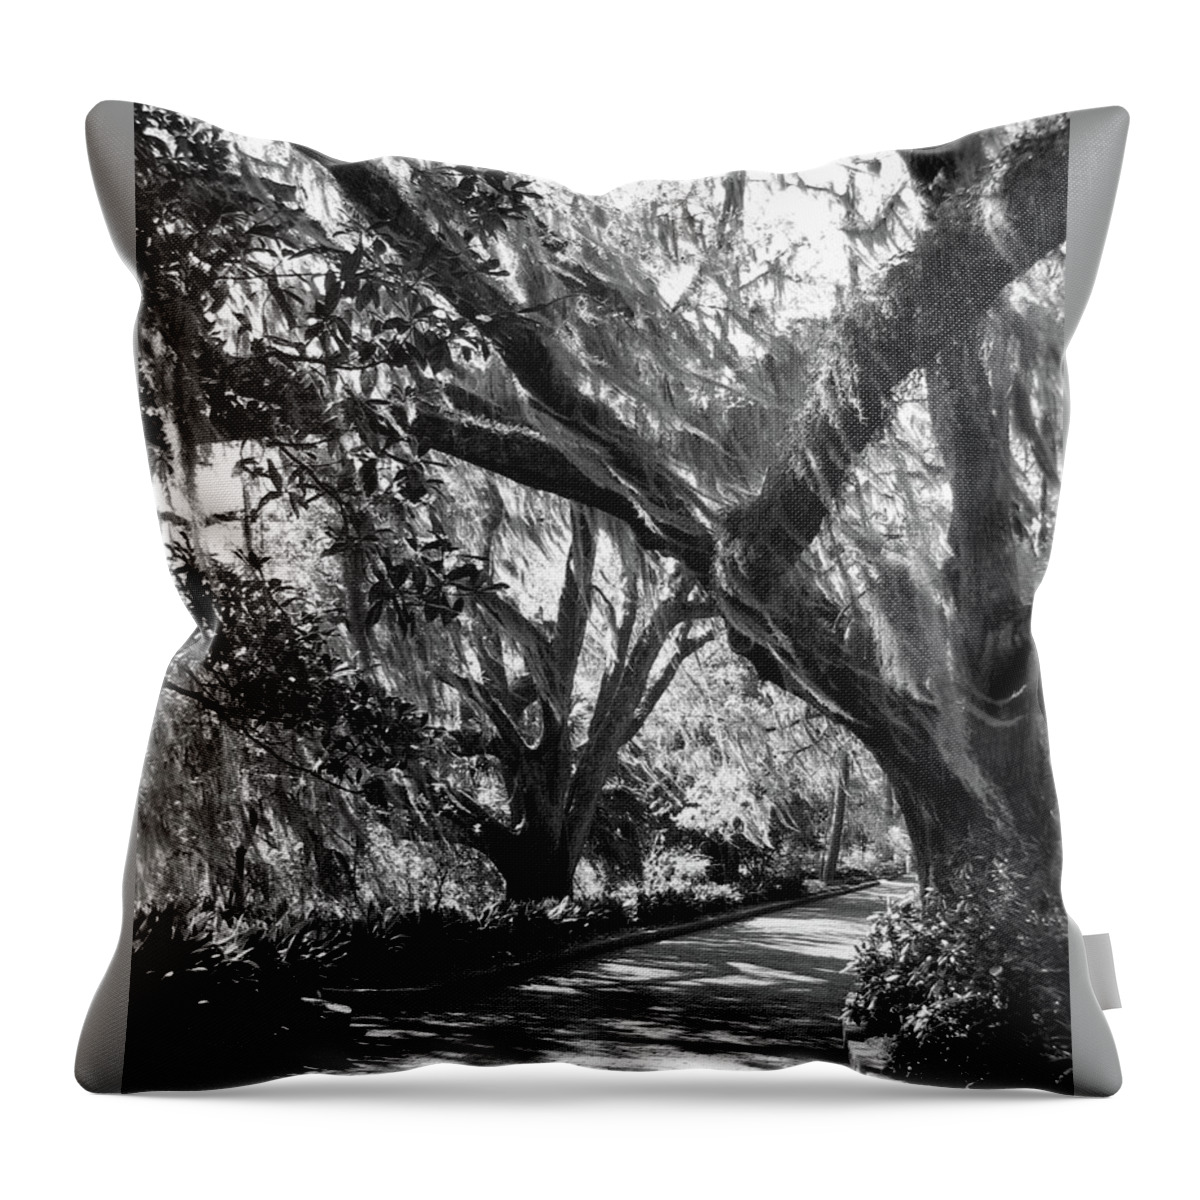 Maclay Gardens Throw Pillow featuring the photograph Bearded Oaks at Maclay Gardens by Carla Parris